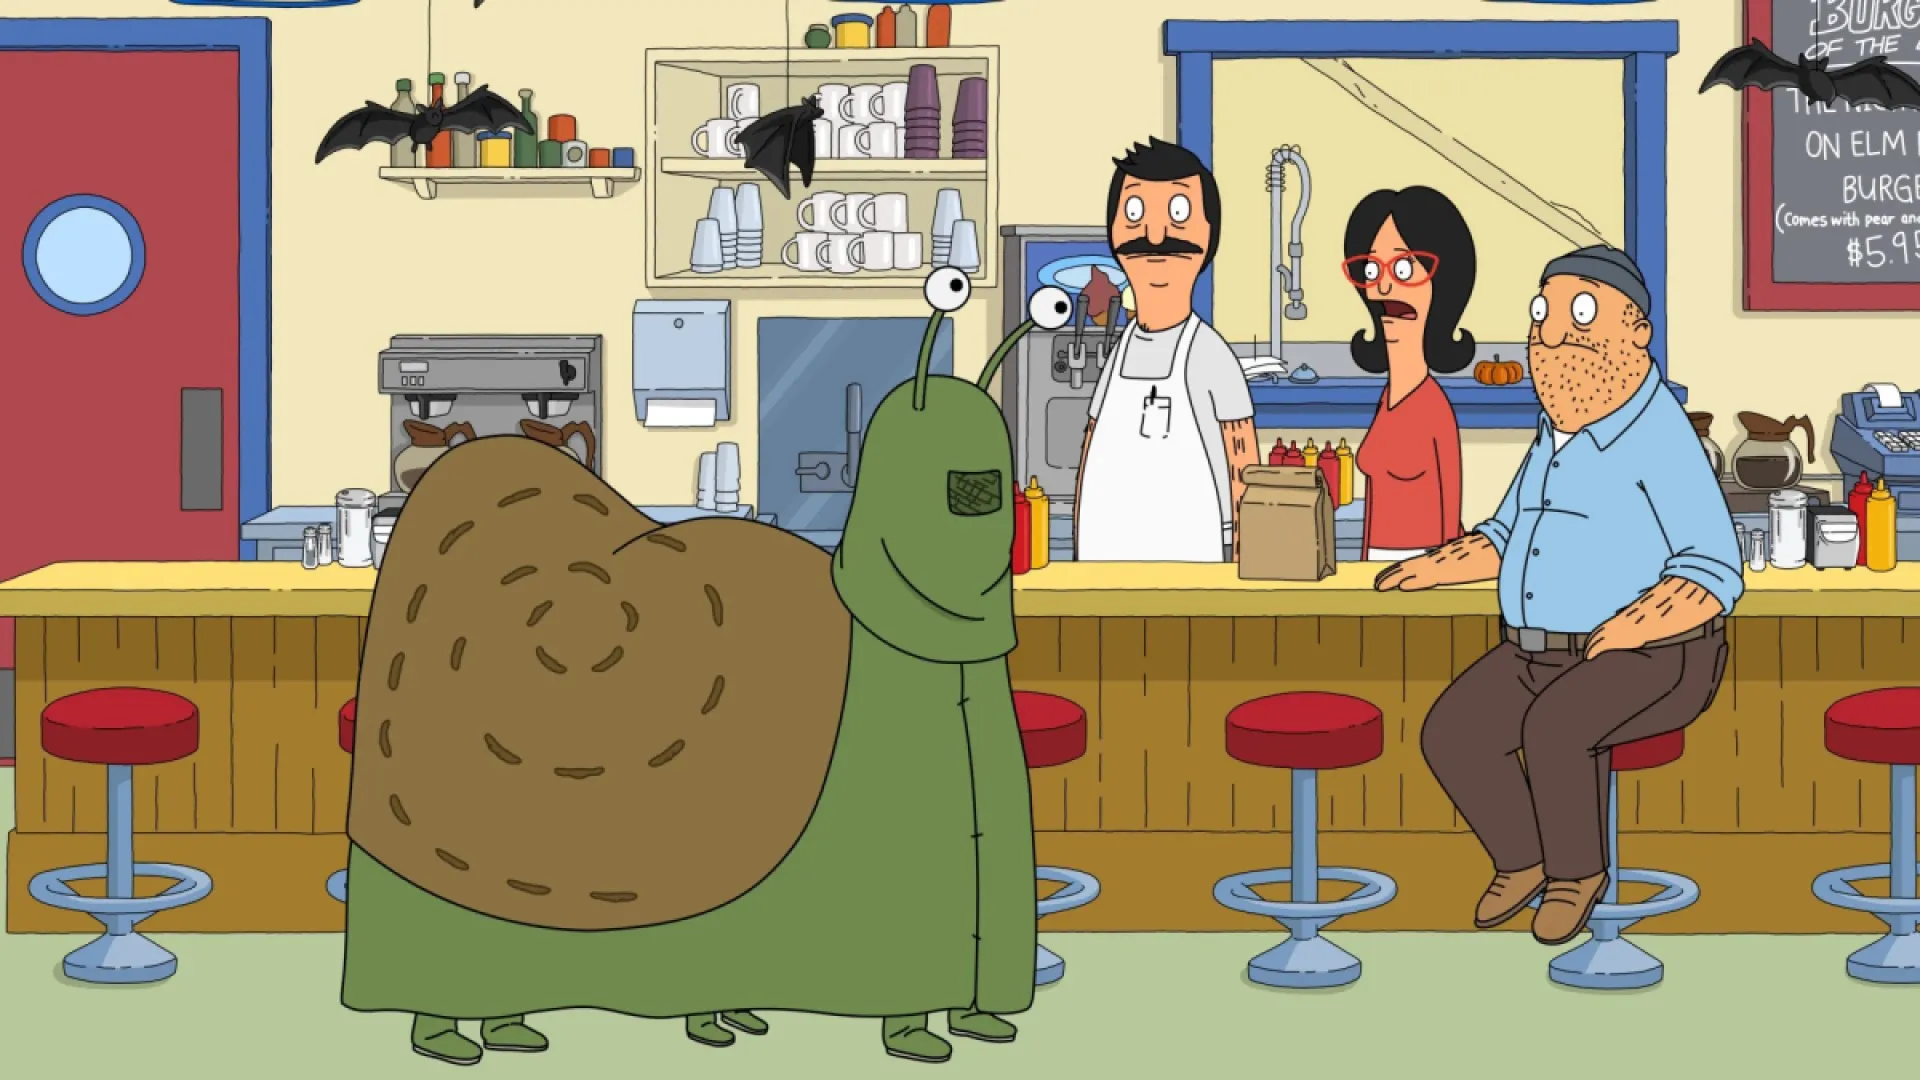 Still from Bob's Burgers episode Heartbreak Hotel-oween; Bob and Linda stand behind the counter in the restaurant, Teddy sits on a stool in front, and the kids stand in their three person snail costume.